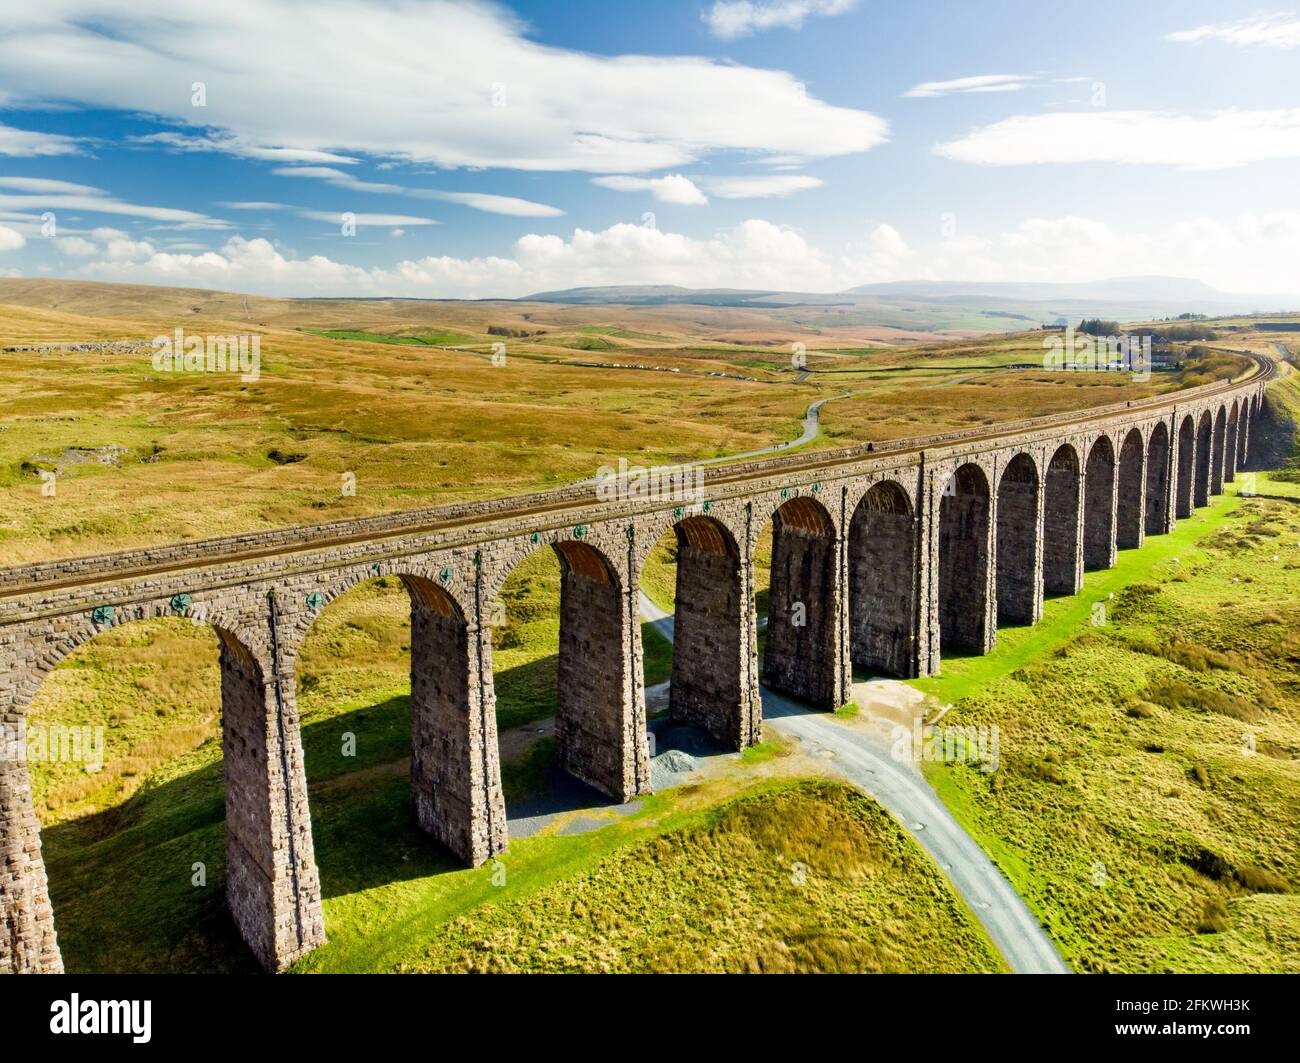 Aerial view of Ribblehead viaduct, located in North Yorkshire, the longest and the third tallest structure on the Settle-Carlisle line. Tourist attrac Stock Photo